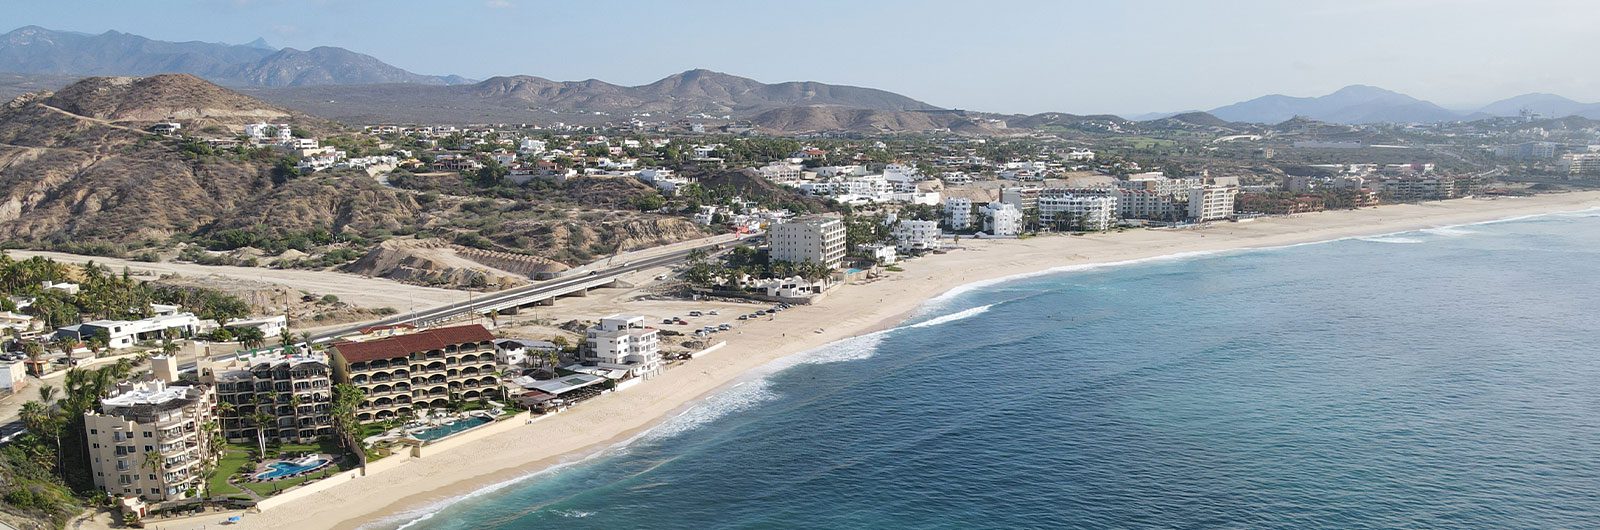 Top 5 Things To Do in San Jose Del Cabo